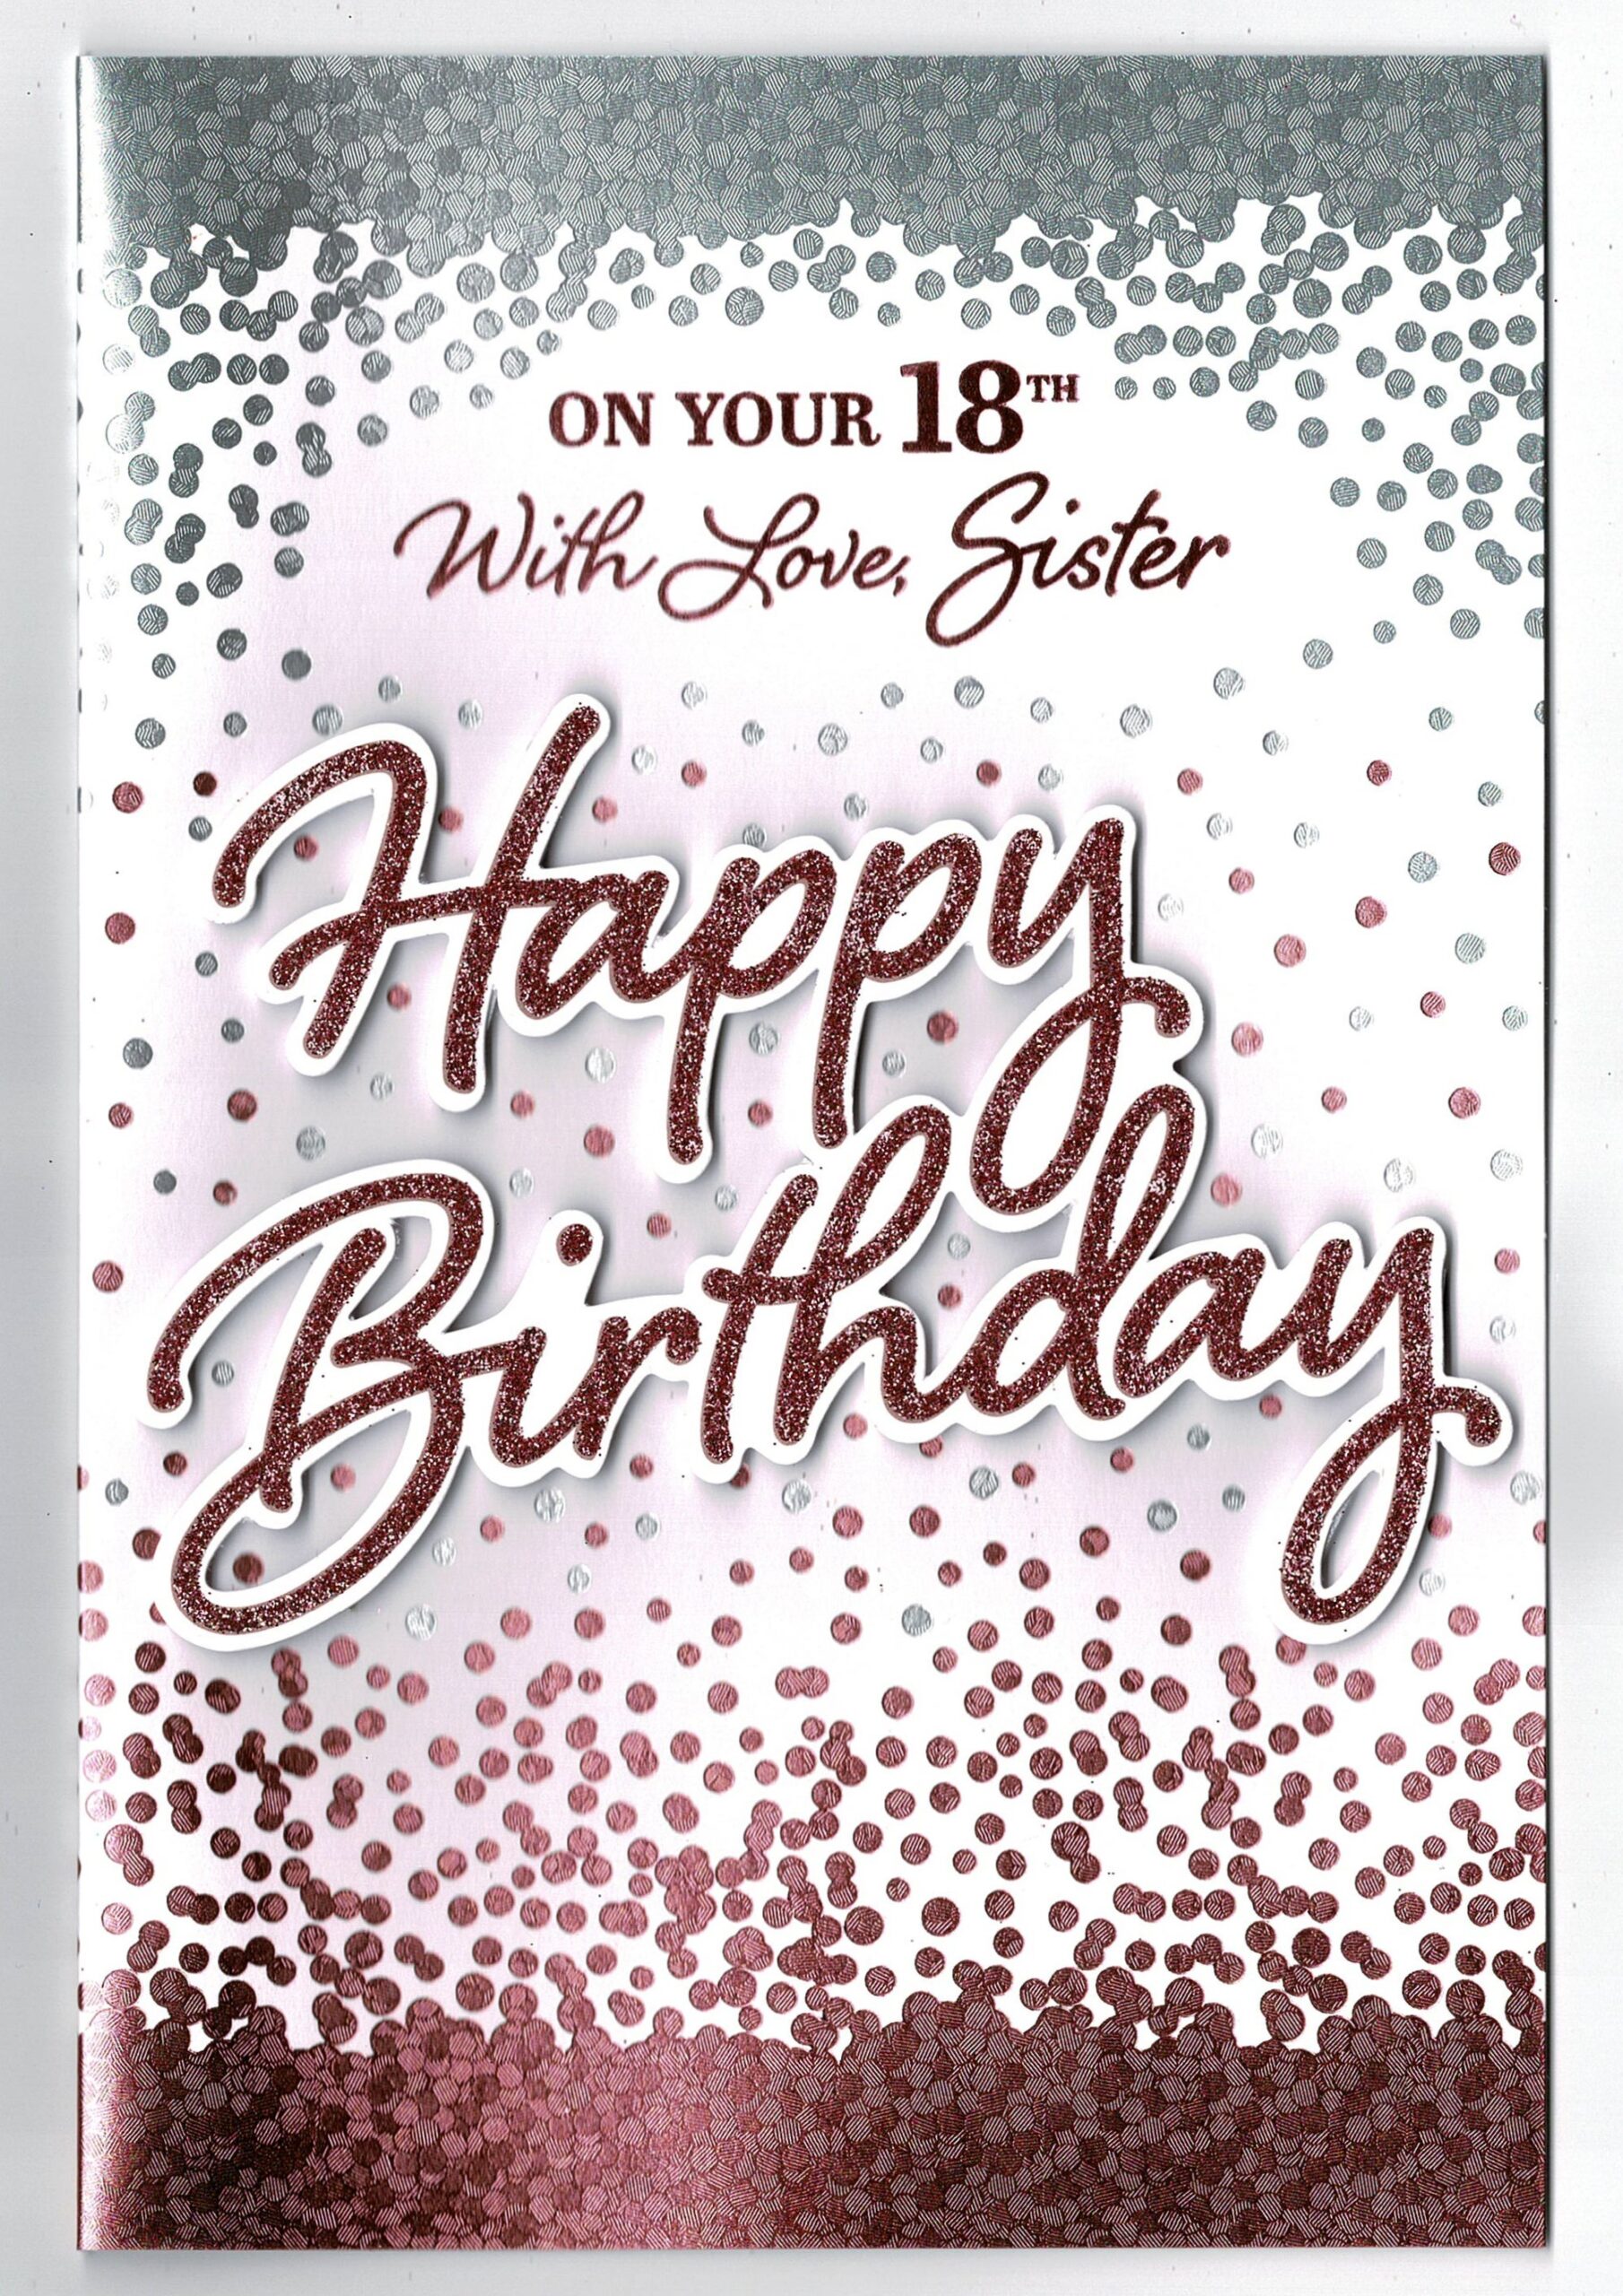 Sister 18th Birthday Card ' On Your 18th With Love Sister' Glitter ...